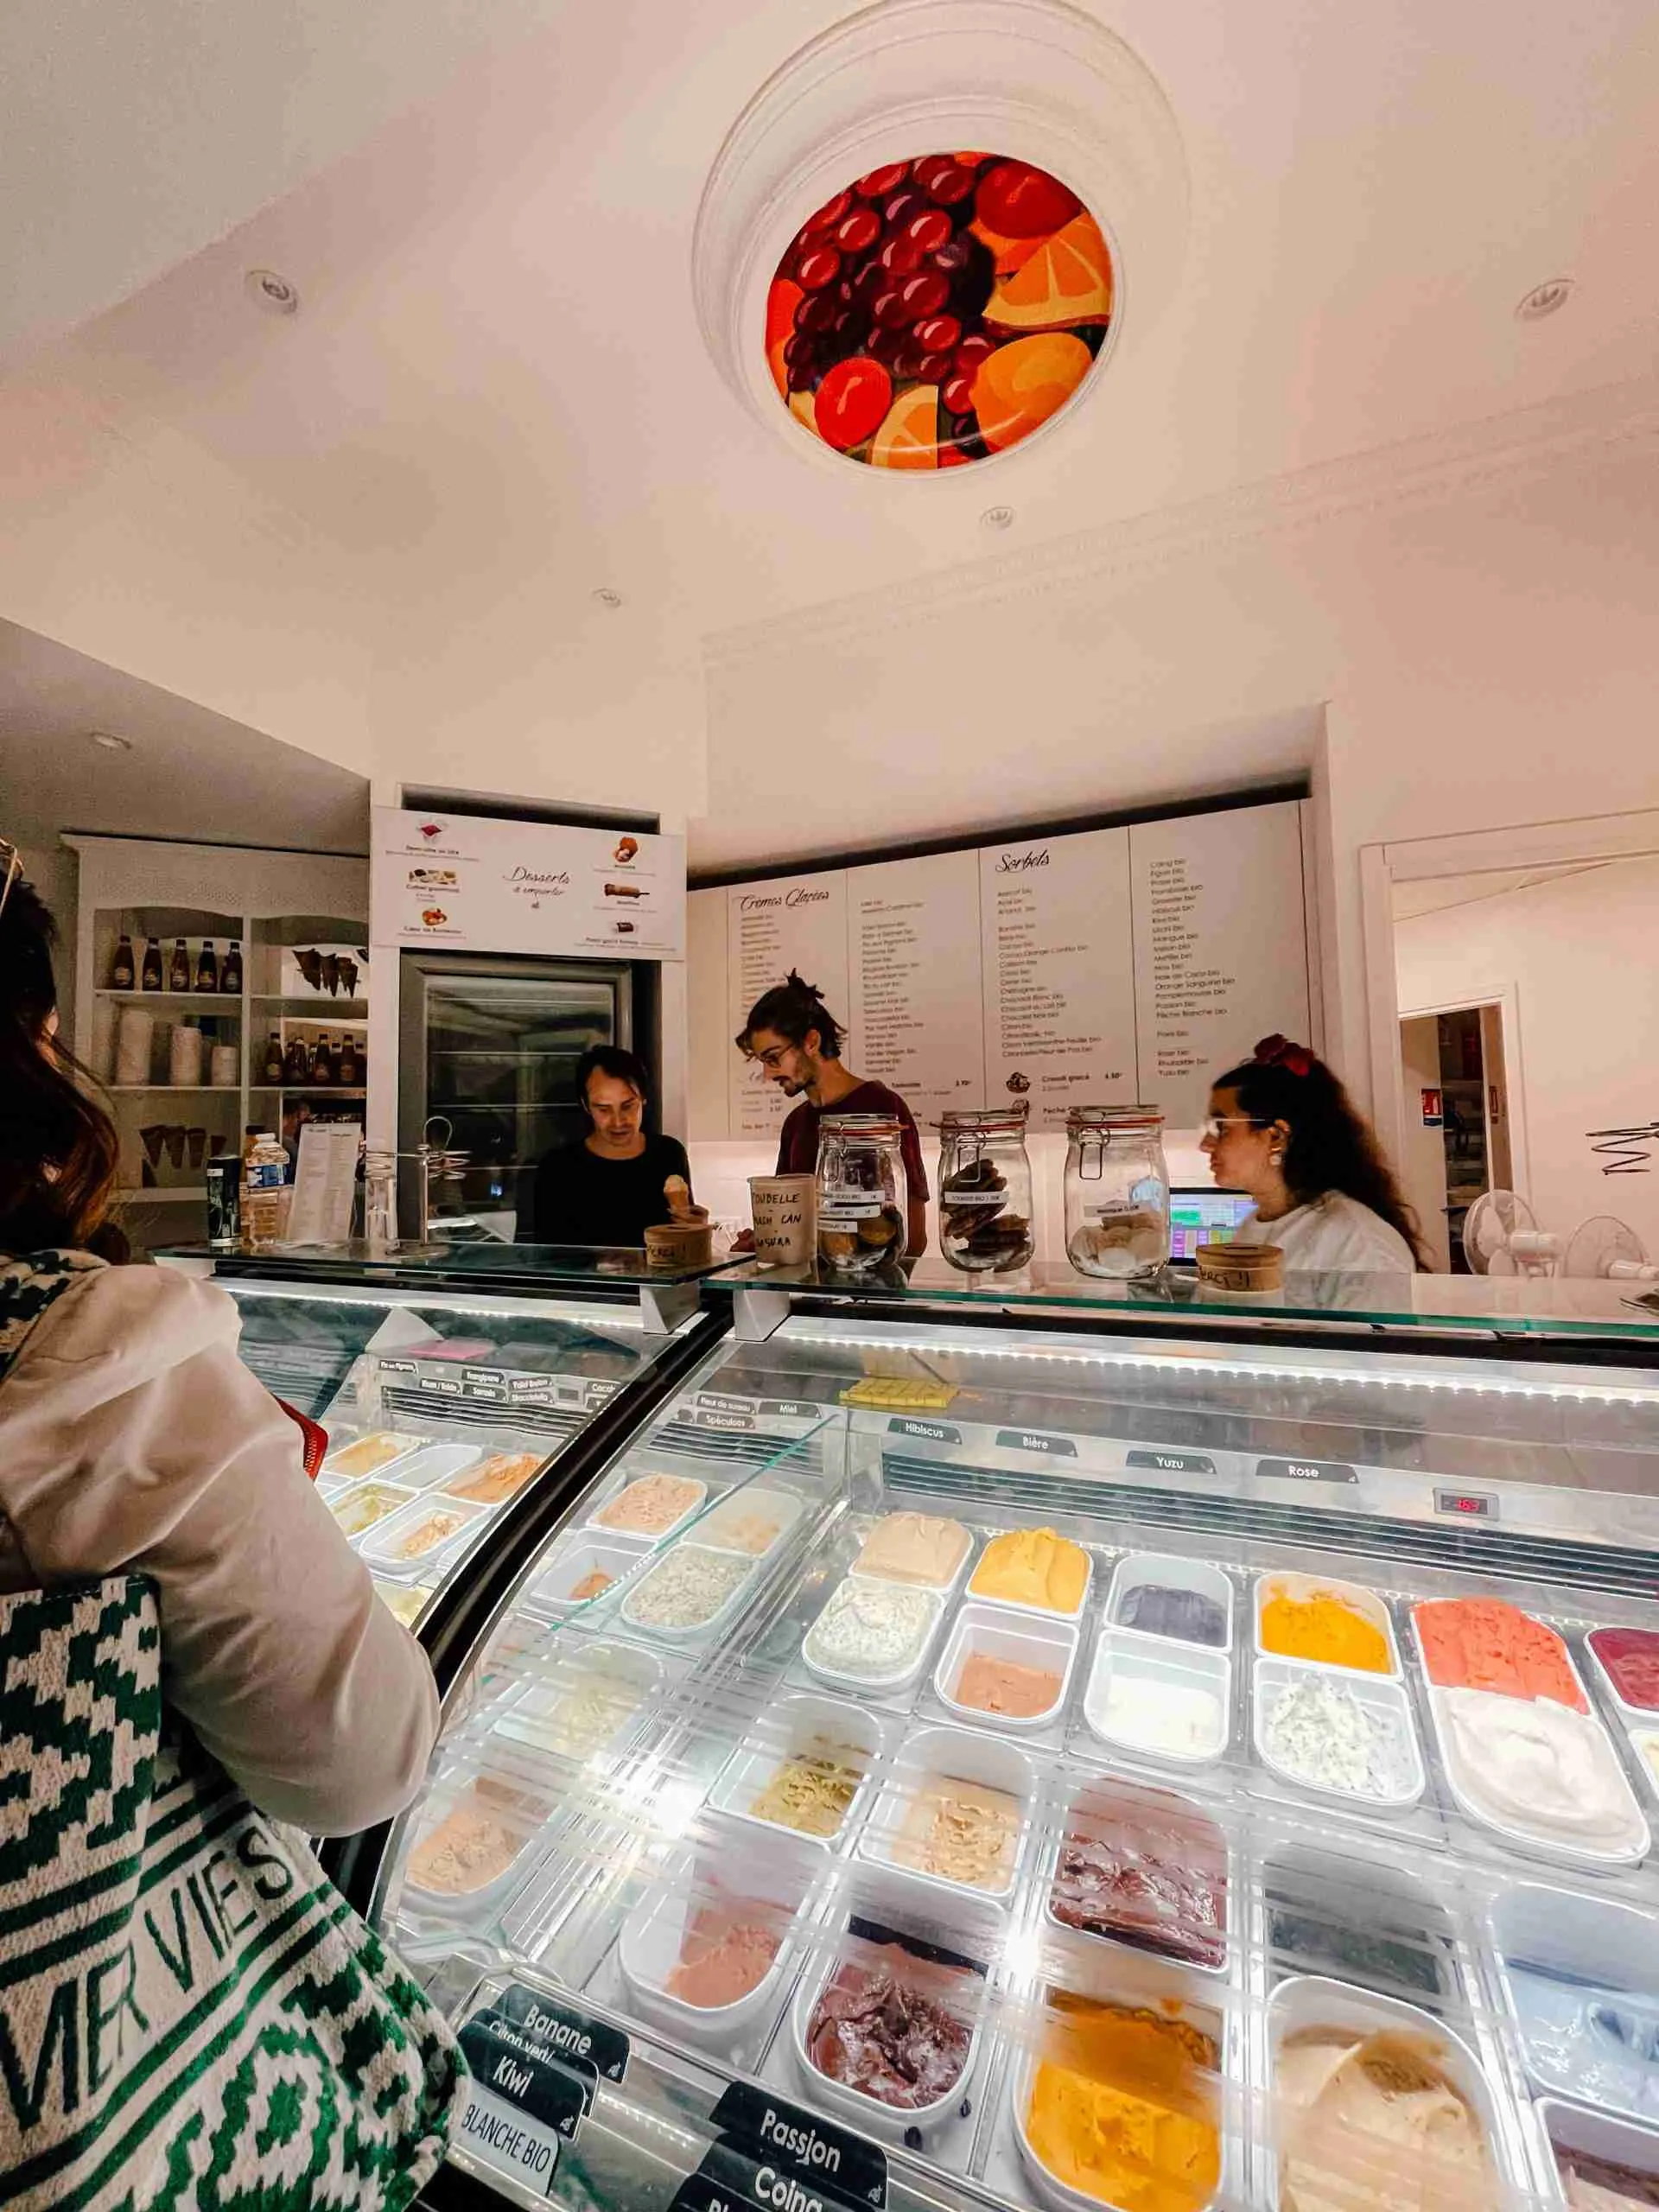 The inside of an ice cream parlour displaying many different flavours